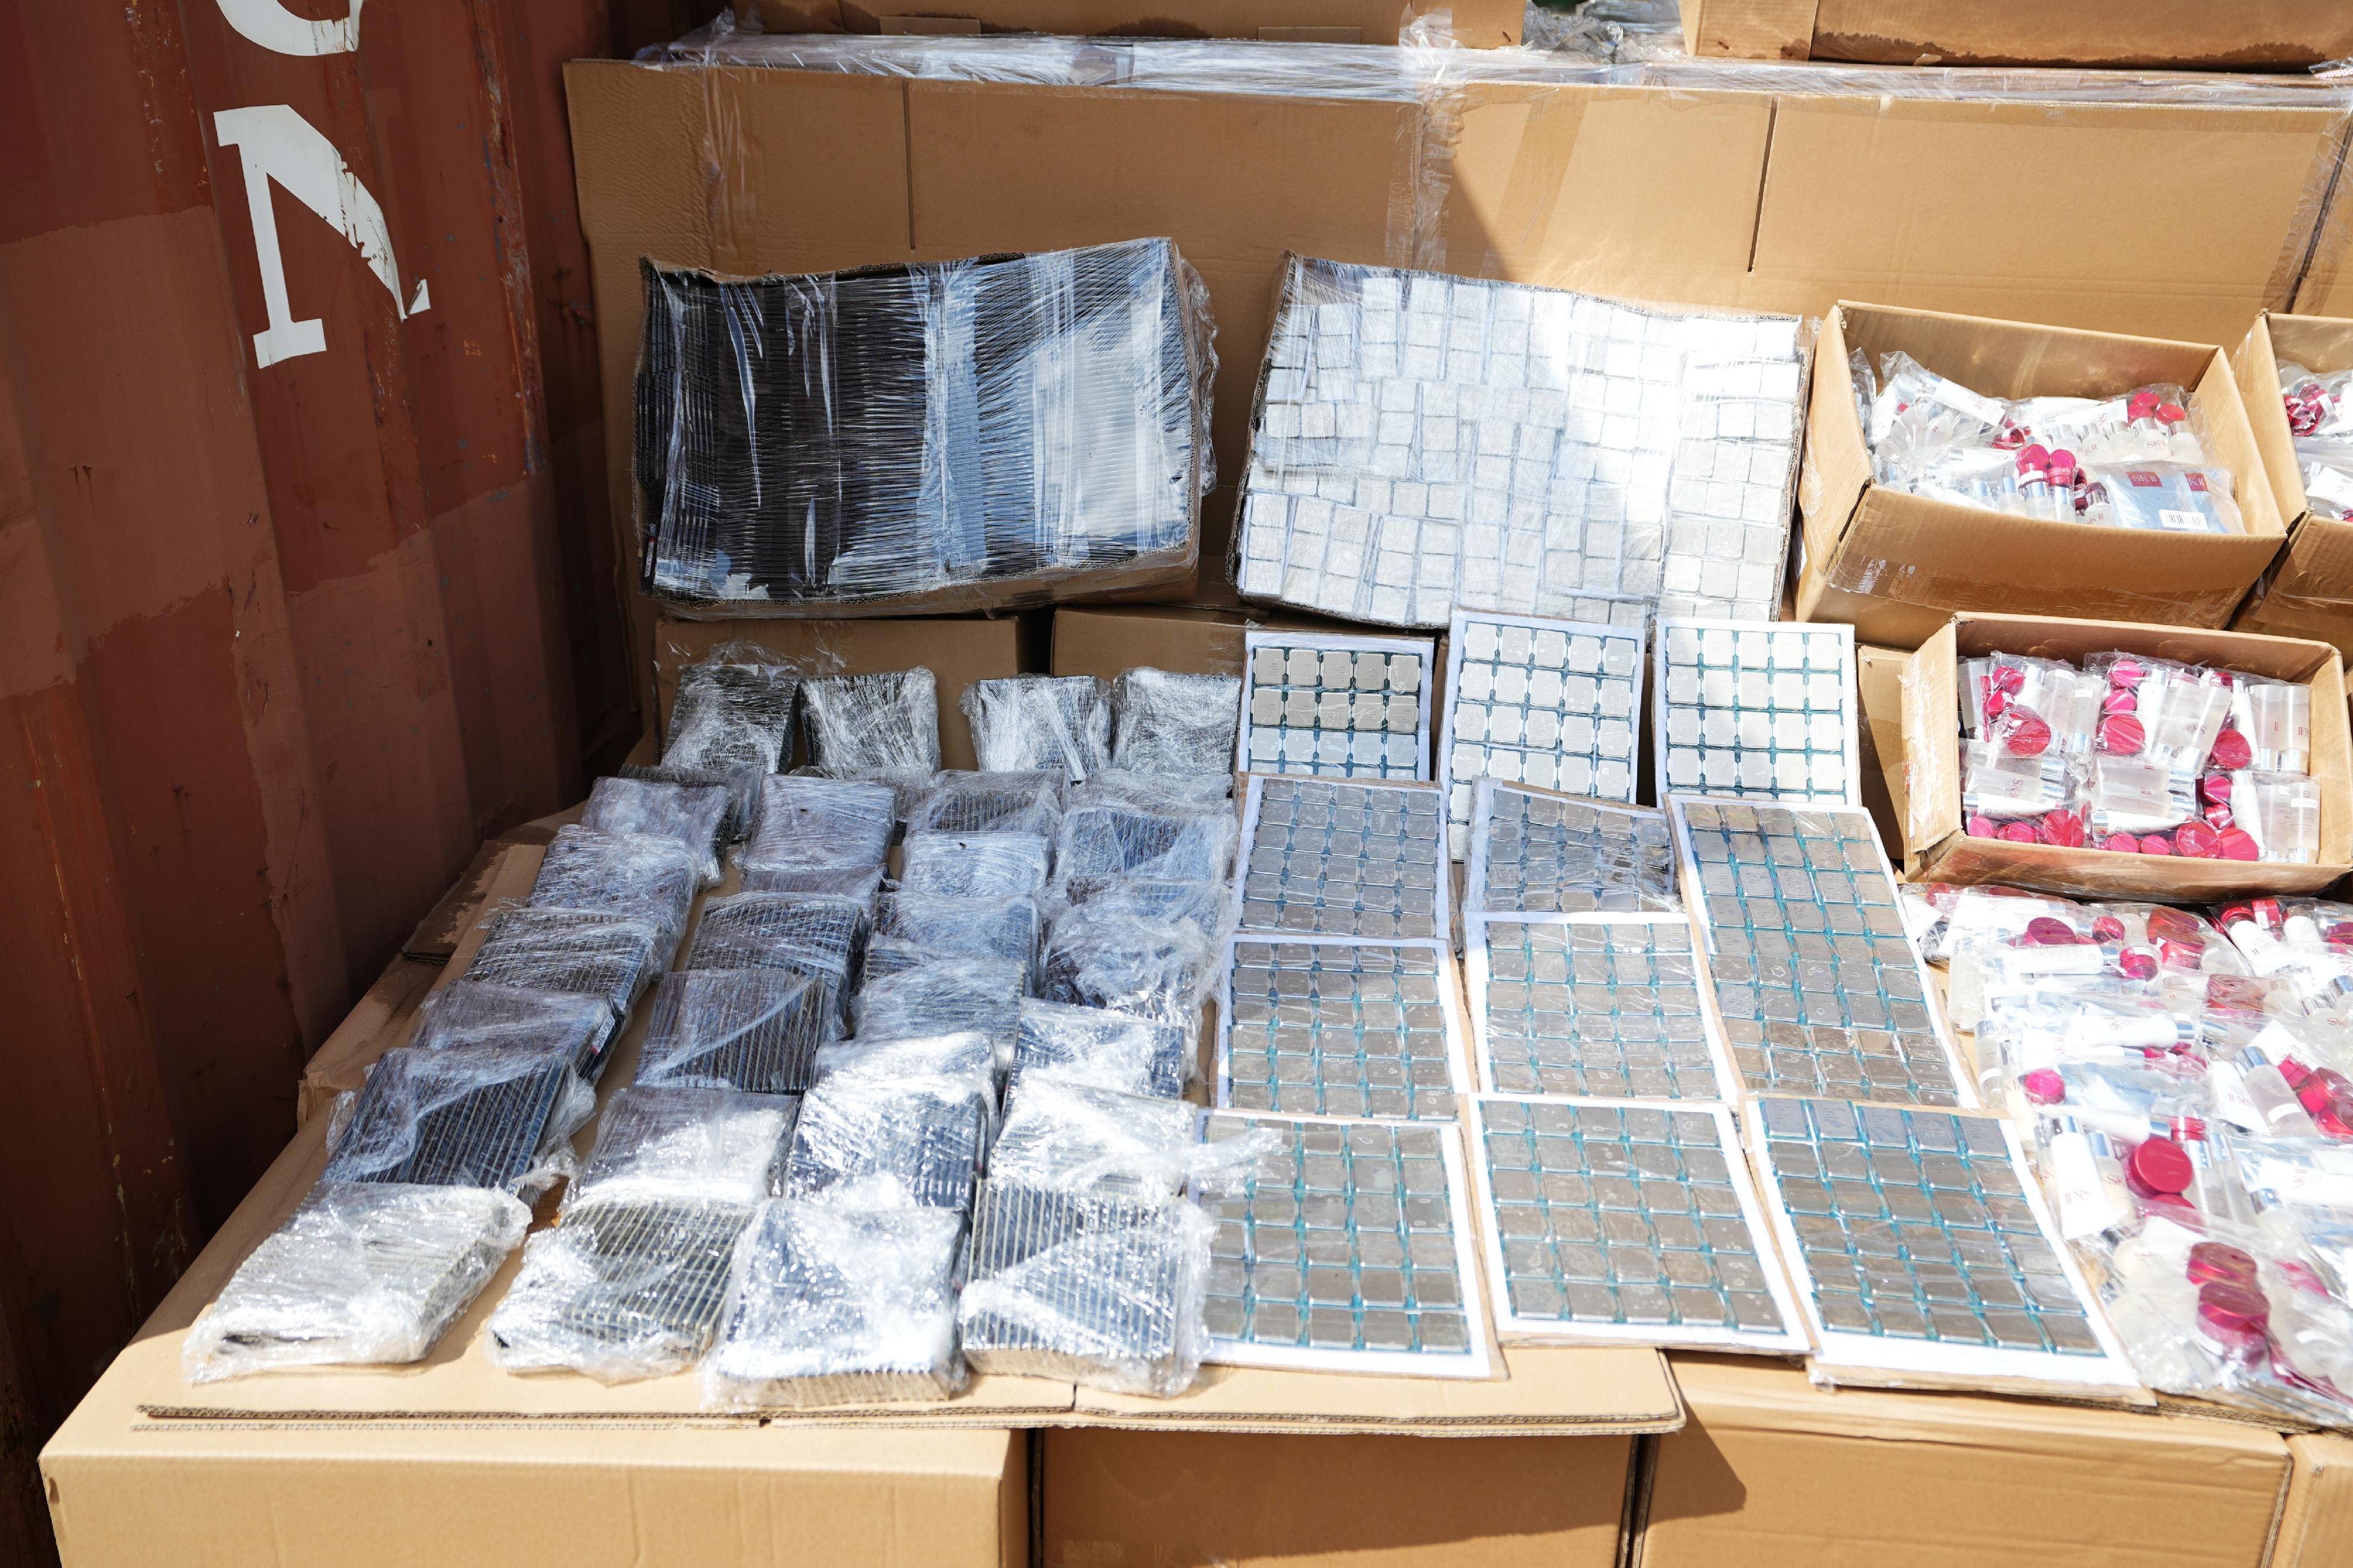 Hong Kong Customs mounted a special operation codenamed "Wave Breaker" from August to September and detected four suspected smuggling cases involving ocean-going vessels and two suspected smuggling cases involving river trade vessels. A large batch of suspected smuggled goods with a total estimated market value of about $100 million was seized. Photo shows some of the electronic parts seized.

